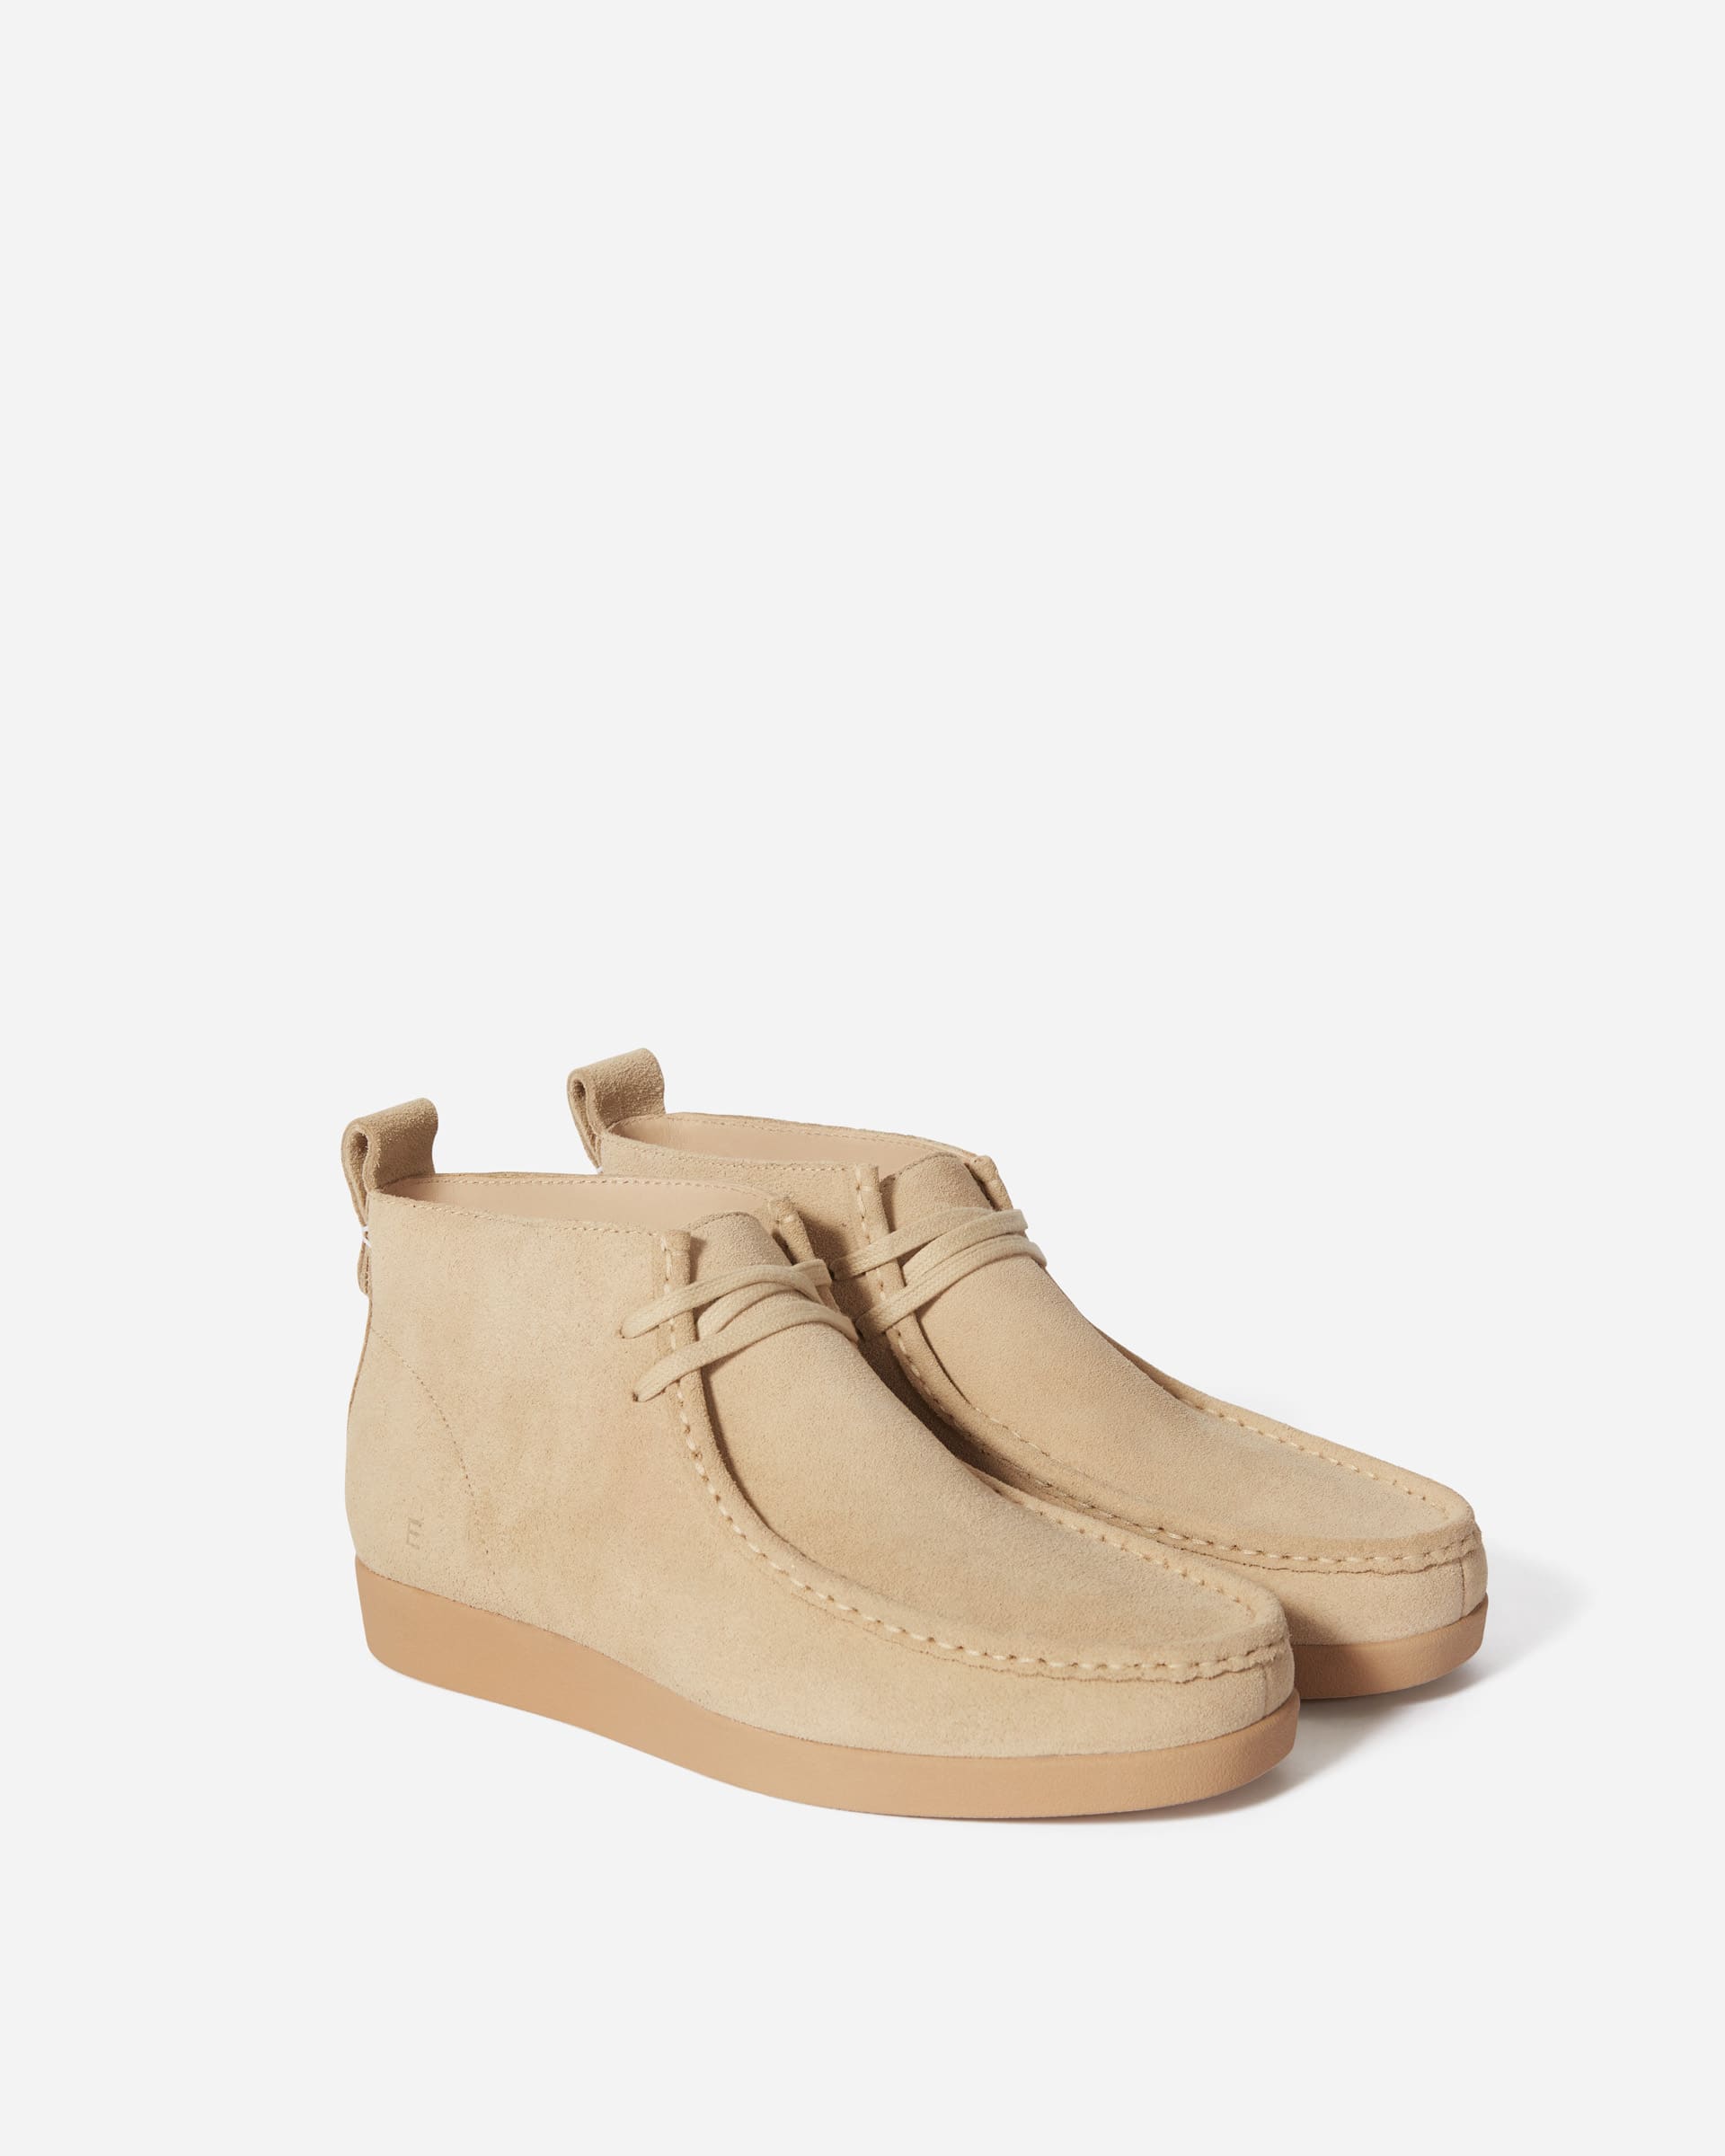 The Moc-Toe Boot Pebble Suede – Everlane